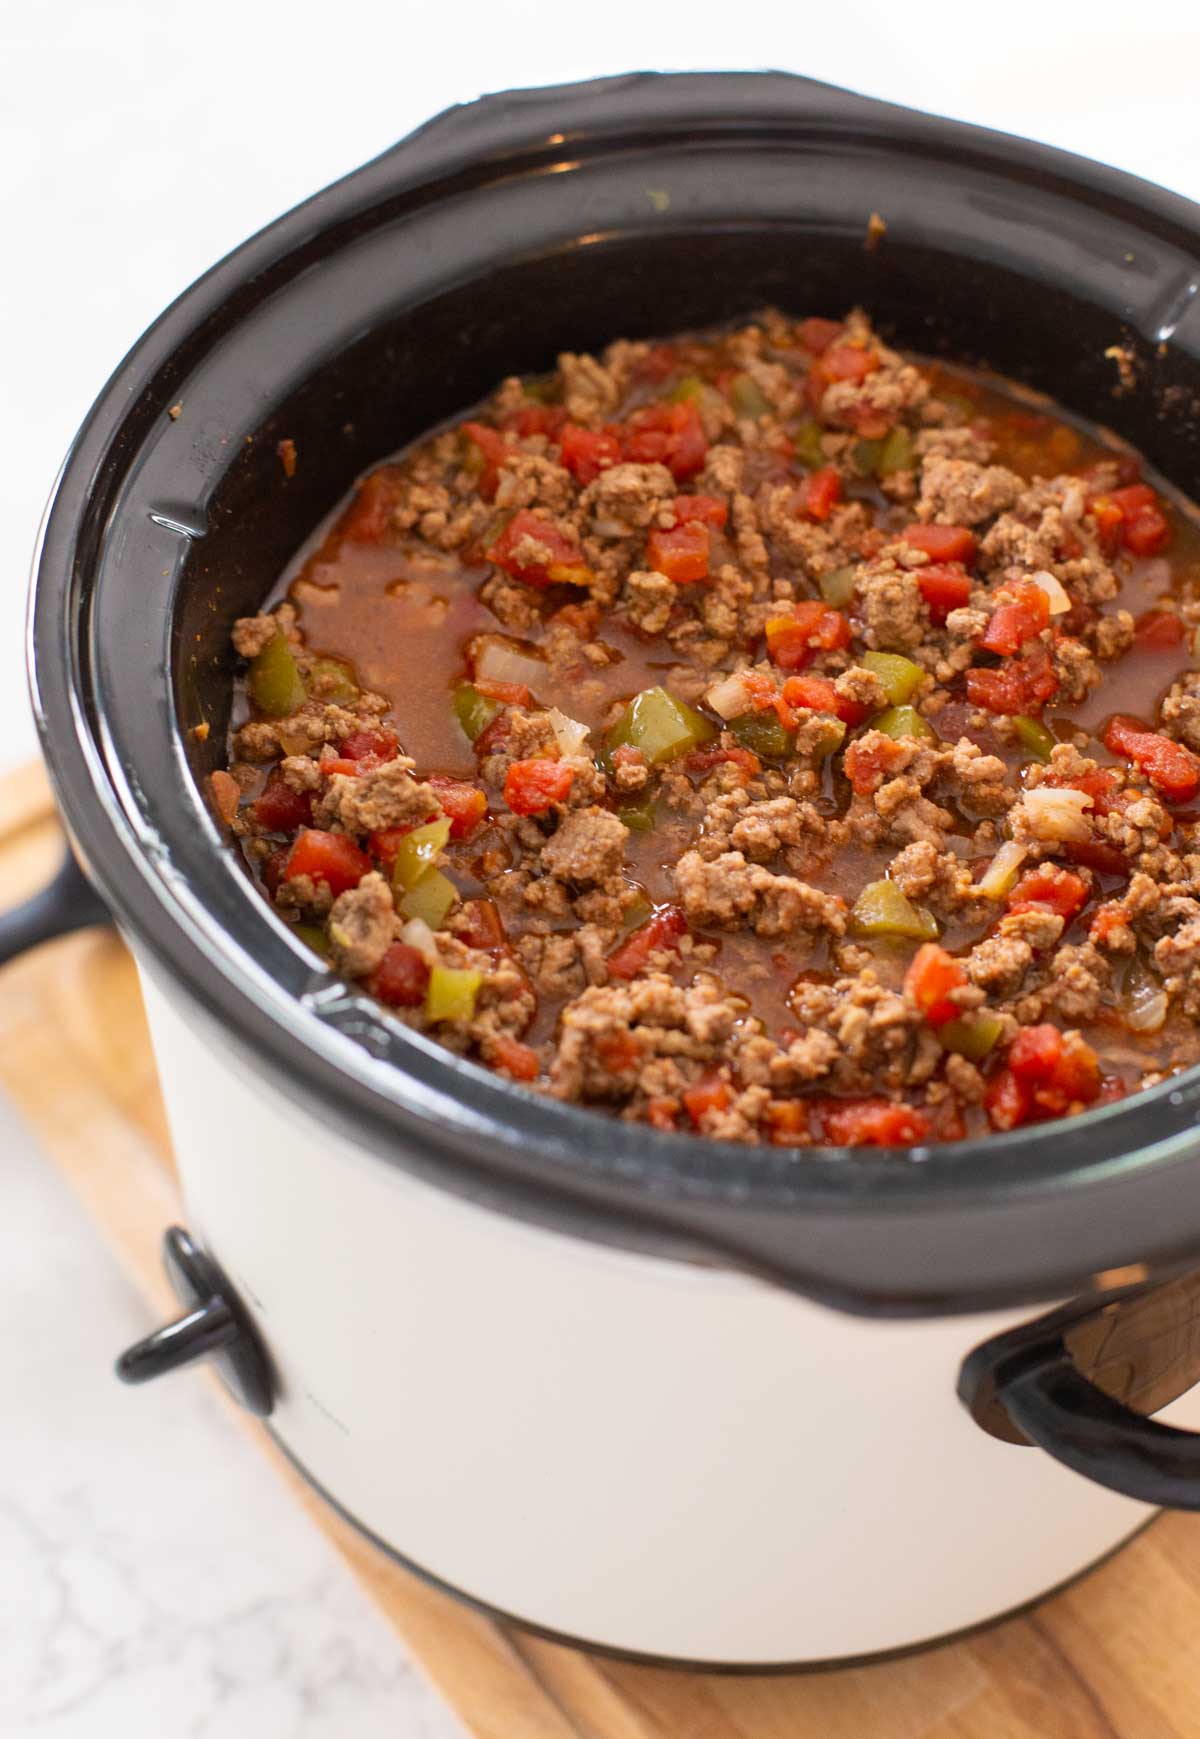 The cooked sloppy joe mix is ready to be served warm from inside the crockpot.